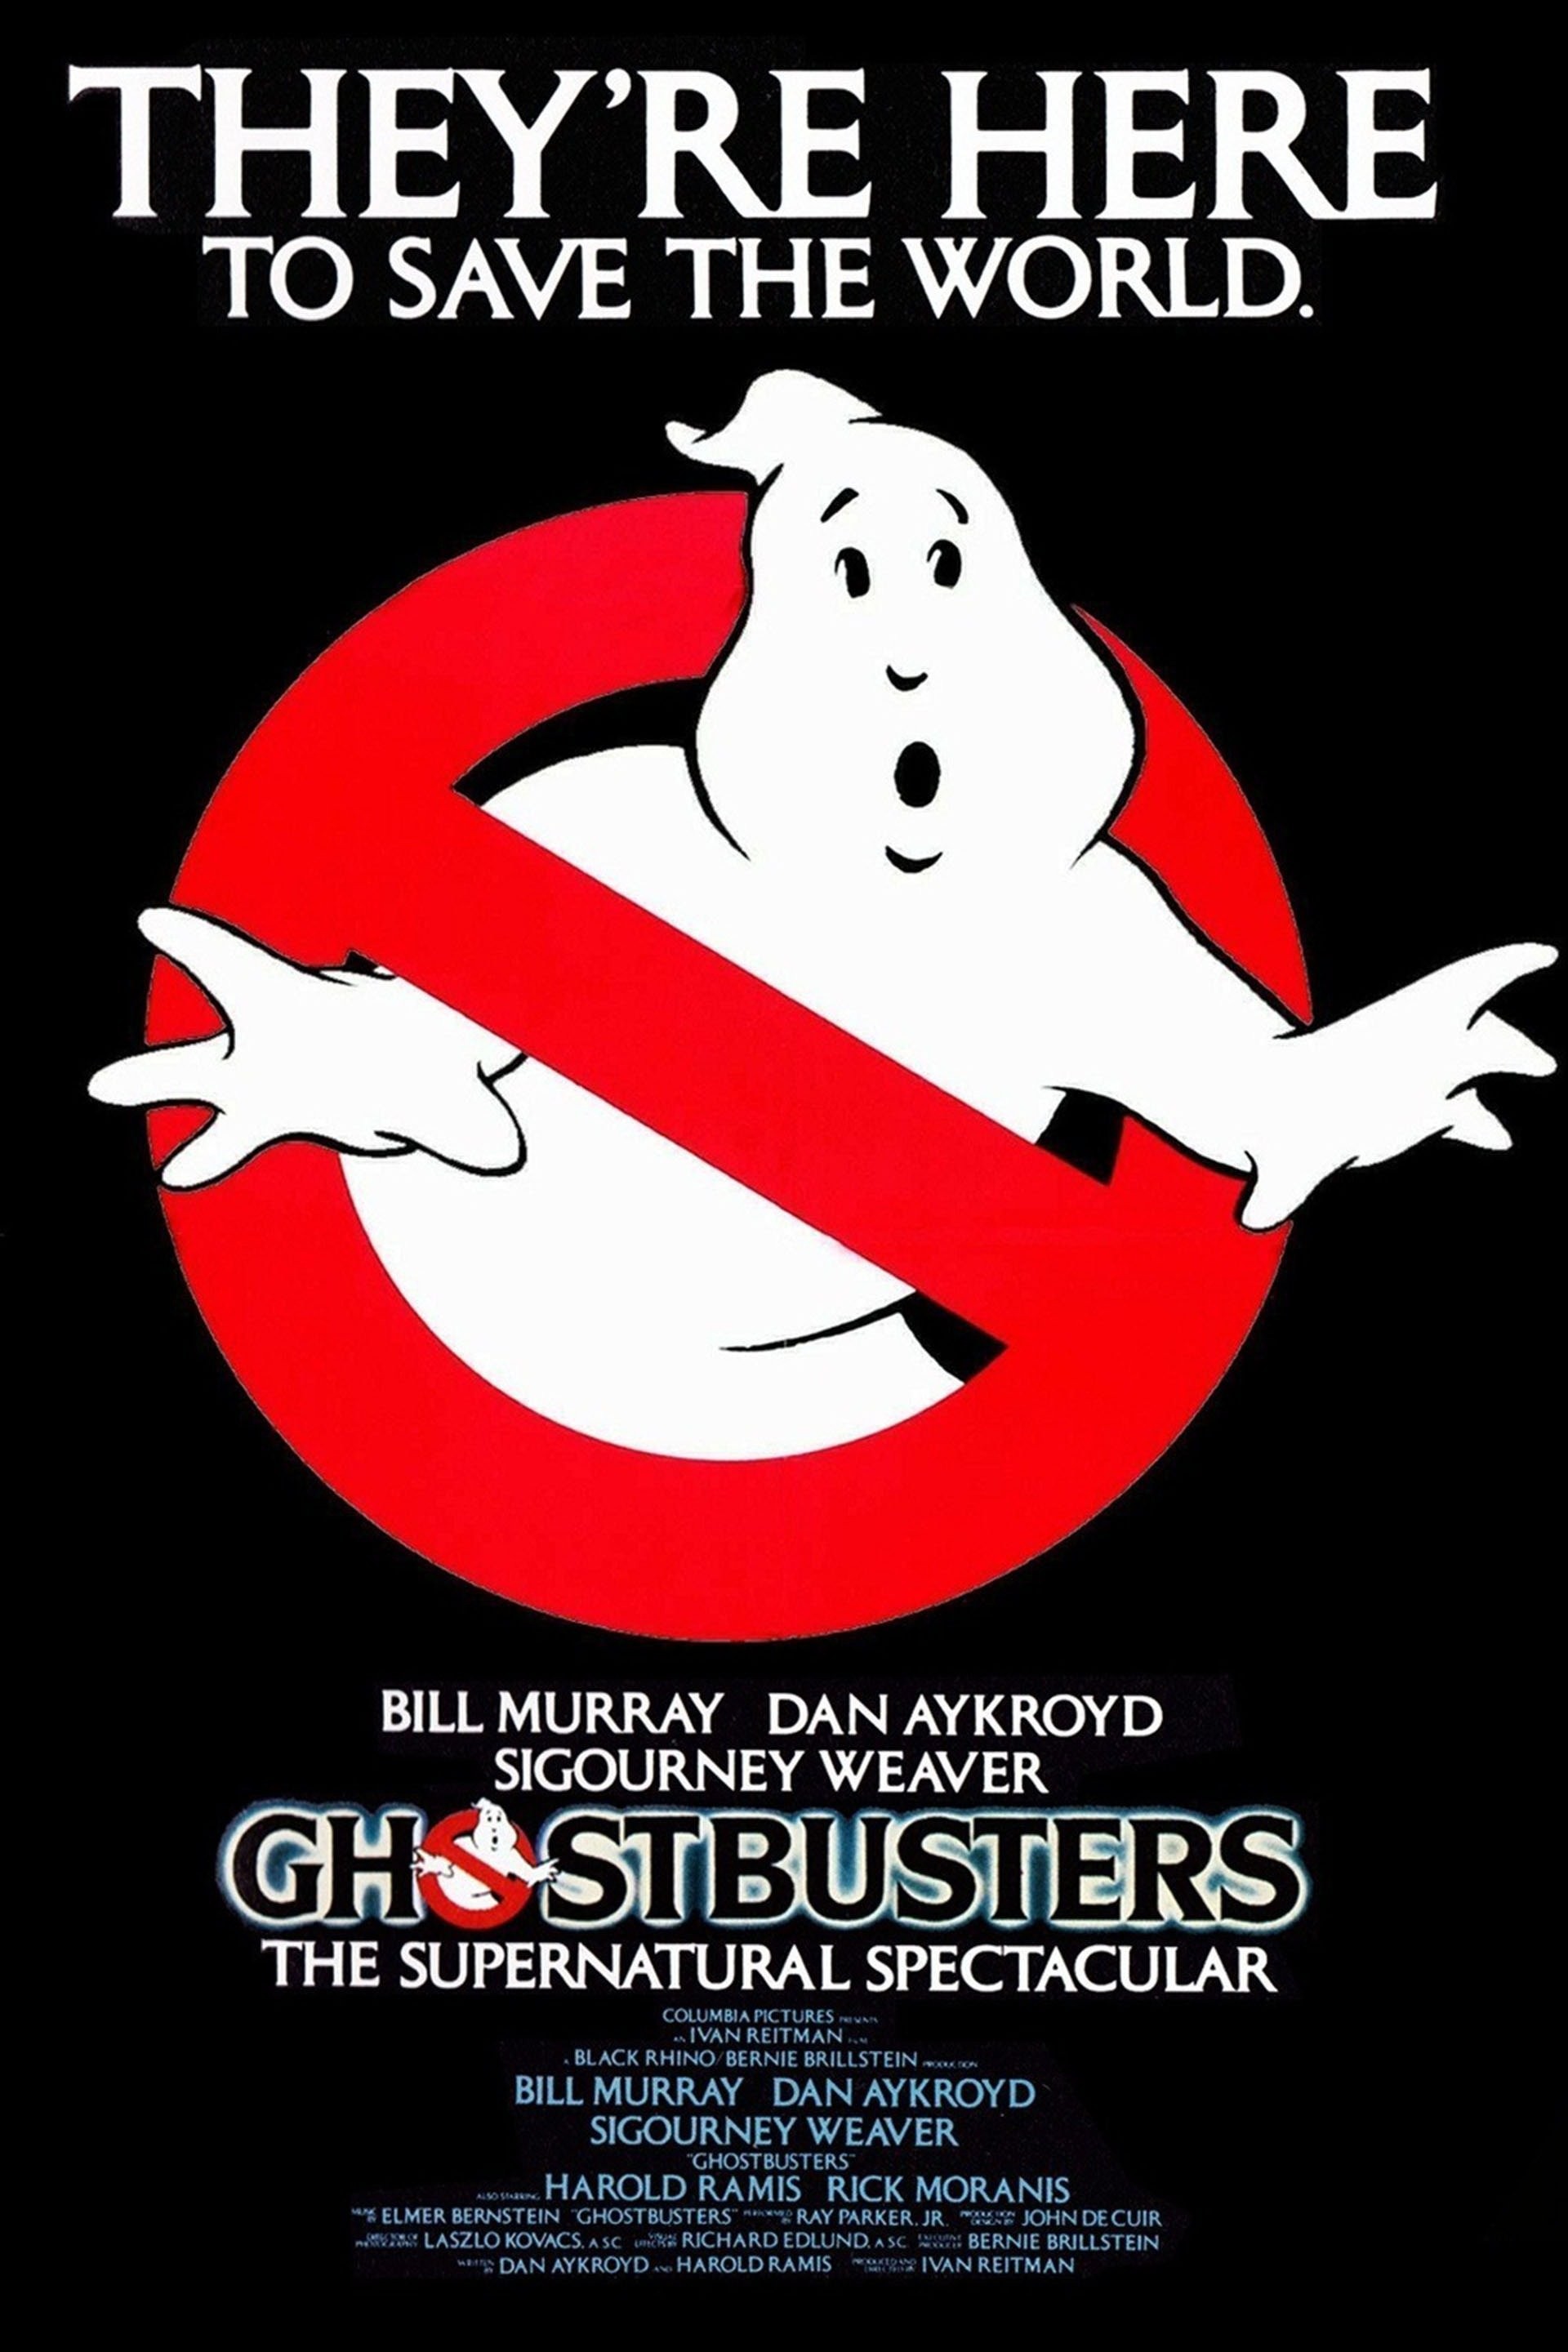 Ghostbusters (1984) (Film) - TV Tropes